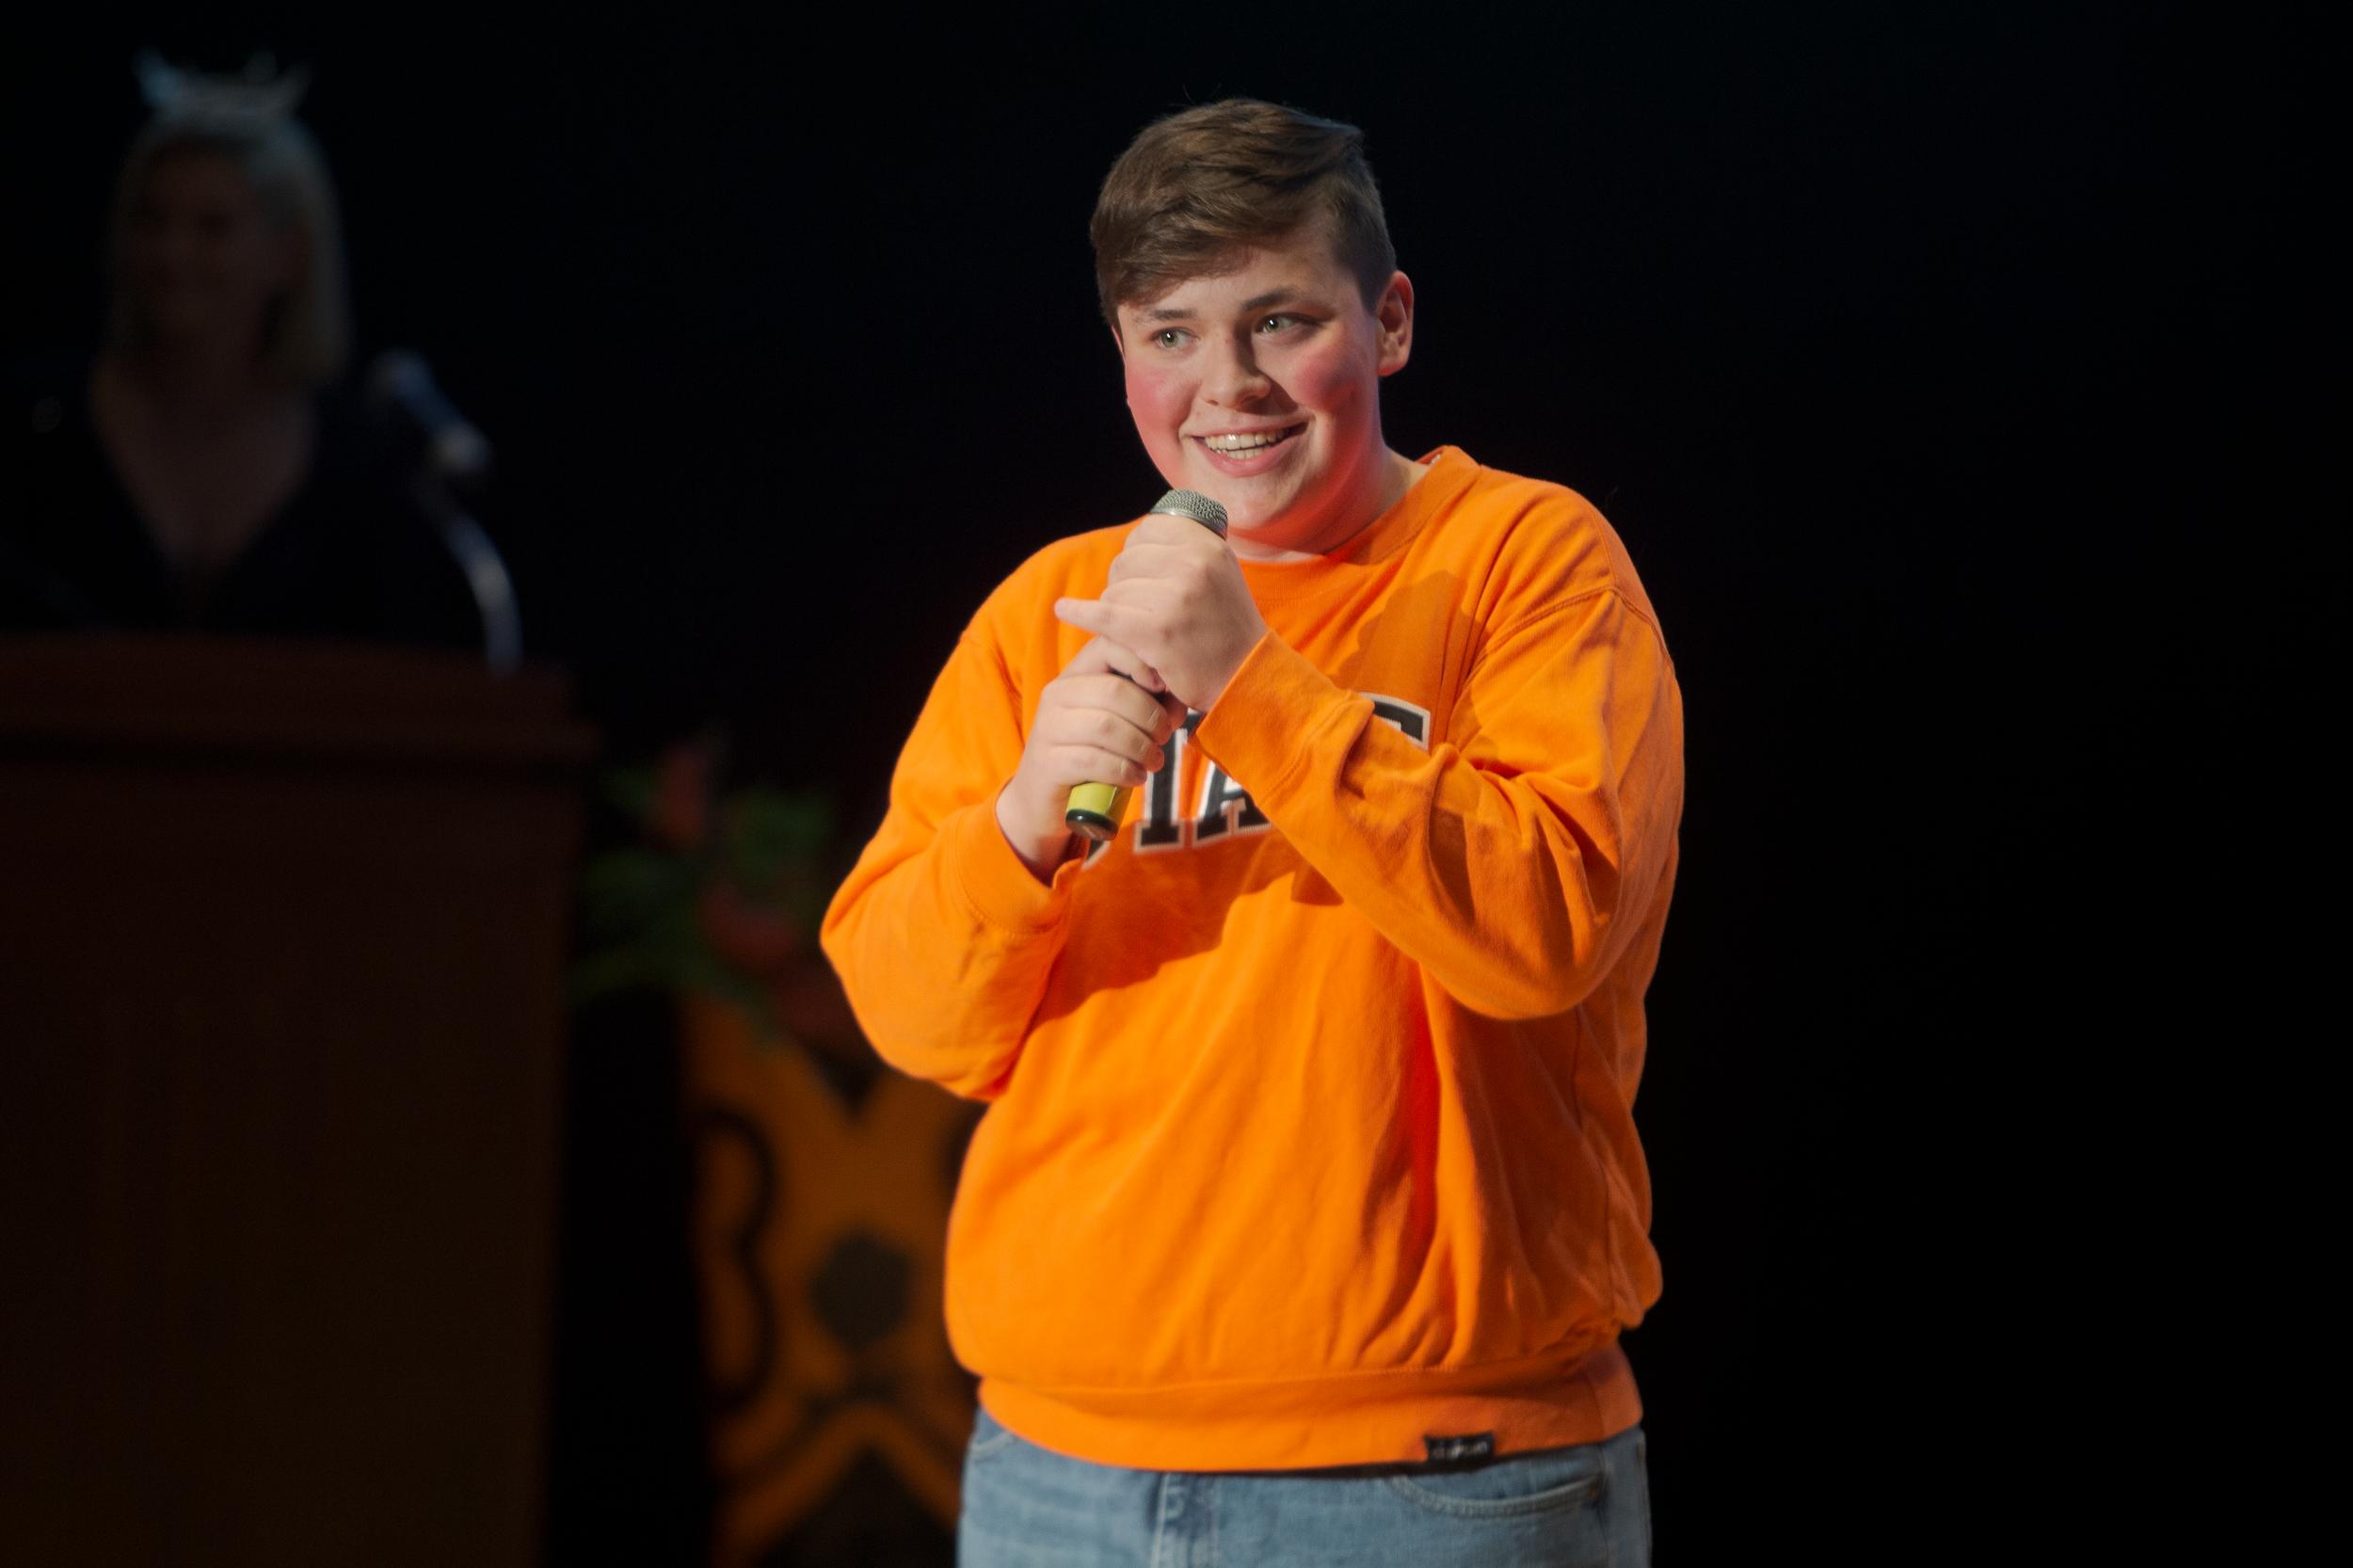 A young man wearing an OSU sweatshirt speaks into a microphone